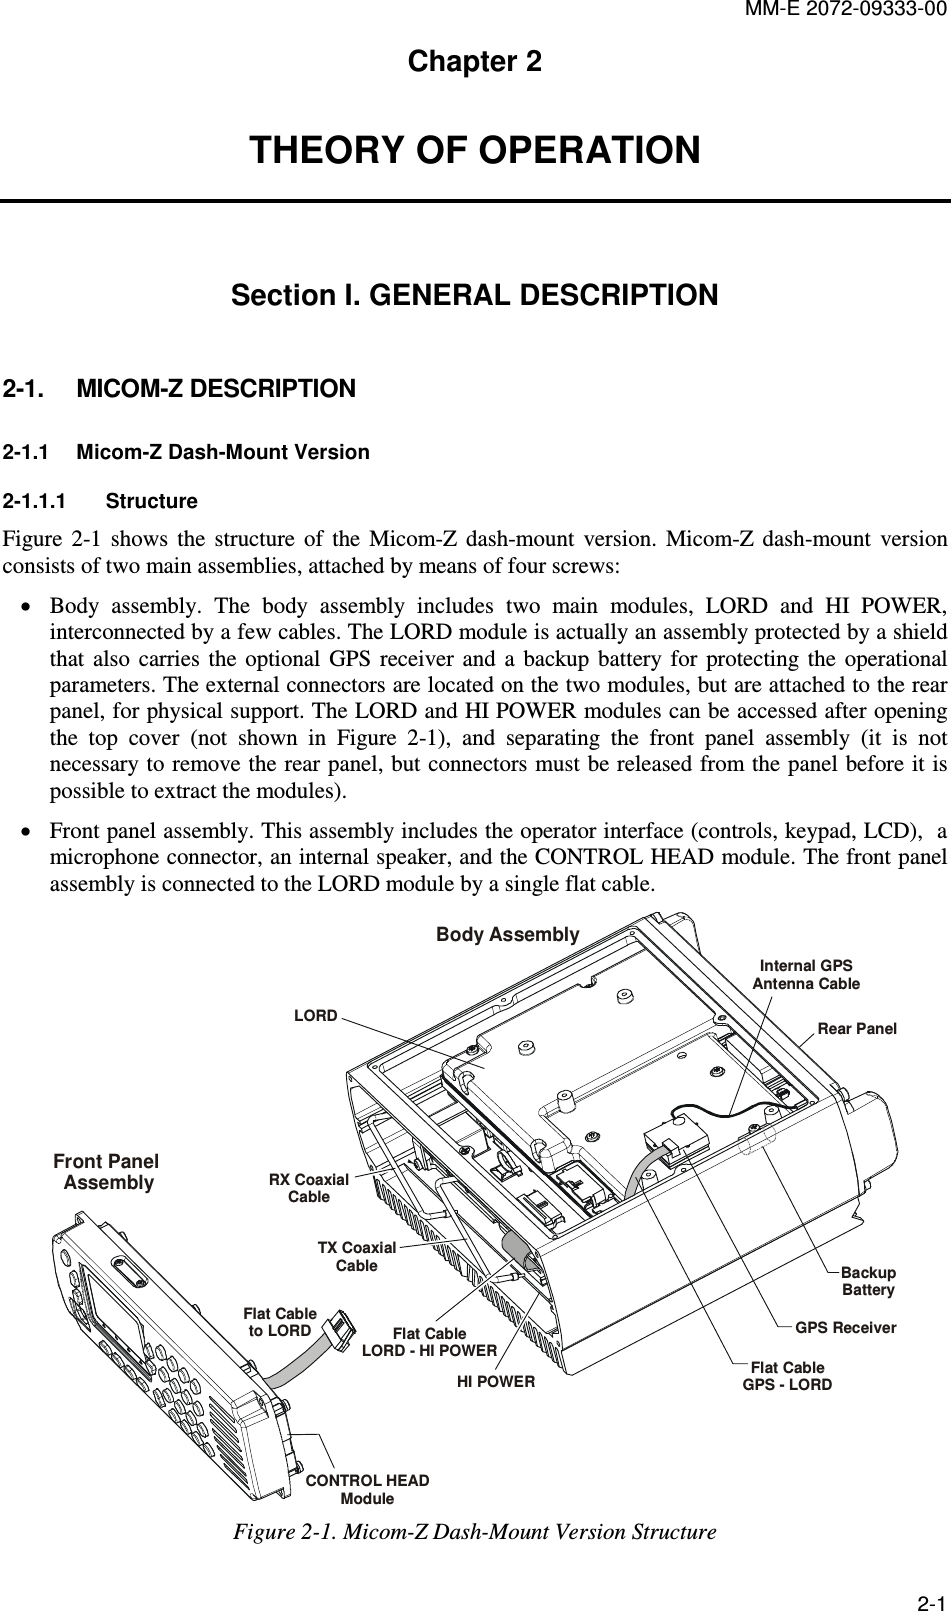 MM-E 2072-09333-00 2-1 Chapter 2 THEORY OF OPERATION Section I. GENERAL DESCRIPTION 2-1.  MICOM-Z DESCRIPTION 2-1.1  Micom-Z Dash-Mount Version 2-1.1.1  Structure Figure   2-1  shows  the  structure  of  the  Micom-Z  dash-mount  version.  Micom-Z  dash-mount  version consists of two main assemblies, attached by means of four screws: • Body  assembly.  The  body  assembly  includes  two  main  modules,  LORD  and  HI  POWER, interconnected by a few cables. The LORD module is actually an assembly protected by a shield that  also  carries  the  optional  GPS  receiver  and  a  backup  battery  for  protecting  the  operational parameters. The external connectors are located on the two modules, but are attached to the rear panel, for physical support. The LORD and HI POWER modules can be accessed after opening the  top  cover  (not  shown  in  Figure   2-1),  and  separating  the  front  panel  assembly  (it  is  not necessary to remove the rear panel, but connectors must be released from the panel before it is possible to extract the modules).  • Front panel assembly. This assembly includes the operator interface (controls, keypad, LCD),  a microphone connector, an internal speaker, and the CONTROL HEAD module. The front panel assembly is connected to the LORD module by a single flat cable. LORDRX CoaxialCableTX CoaxialCableFlat CableLORD - HI POWERFlat CableGPS - LORDBody AssemblyFront Panel AssemblyGPS ReceiverRear PanelInternal GPS Antenna CableBackupBatteryHI POWERCONTROL HEADModuleFlat Cableto LORD Figure  2-1. Micom-Z Dash-Mount Version Structure 